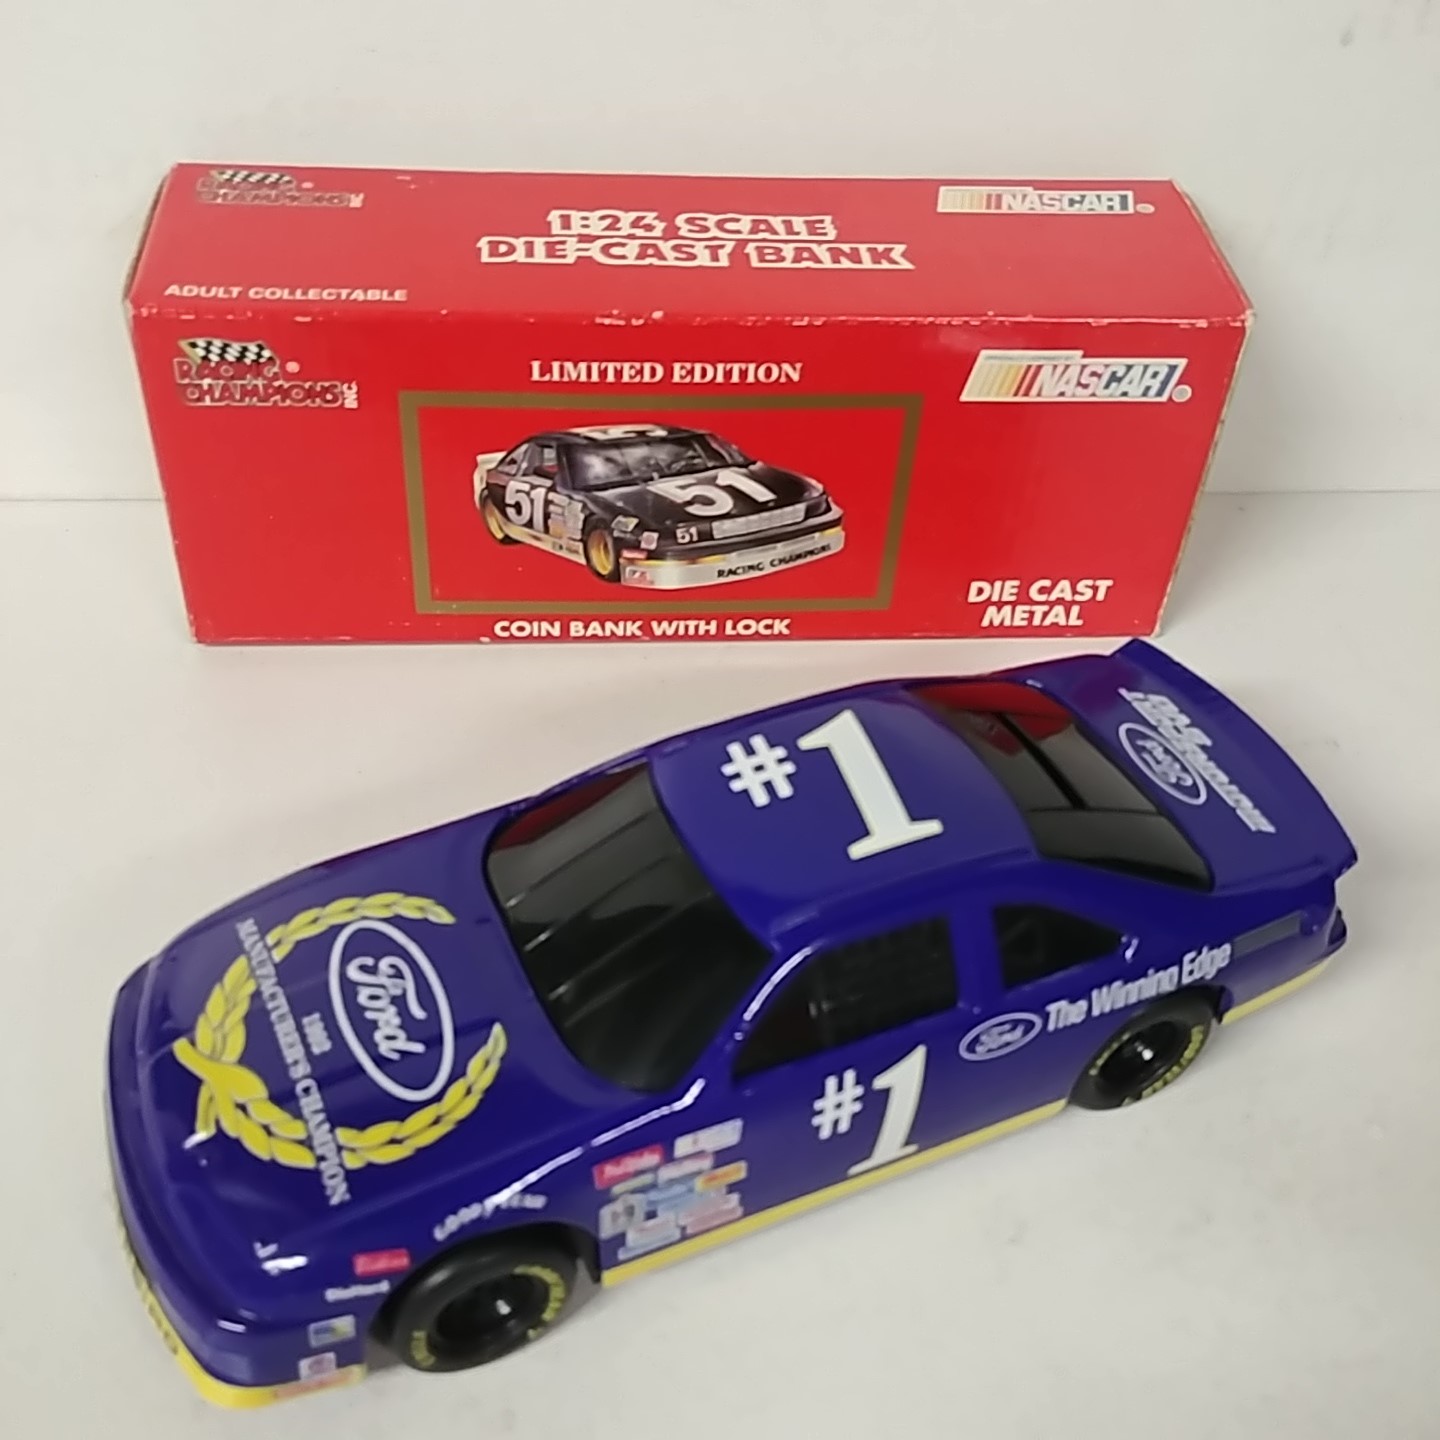 1992 Ford 1/24th Manufactures Champion b/w bank